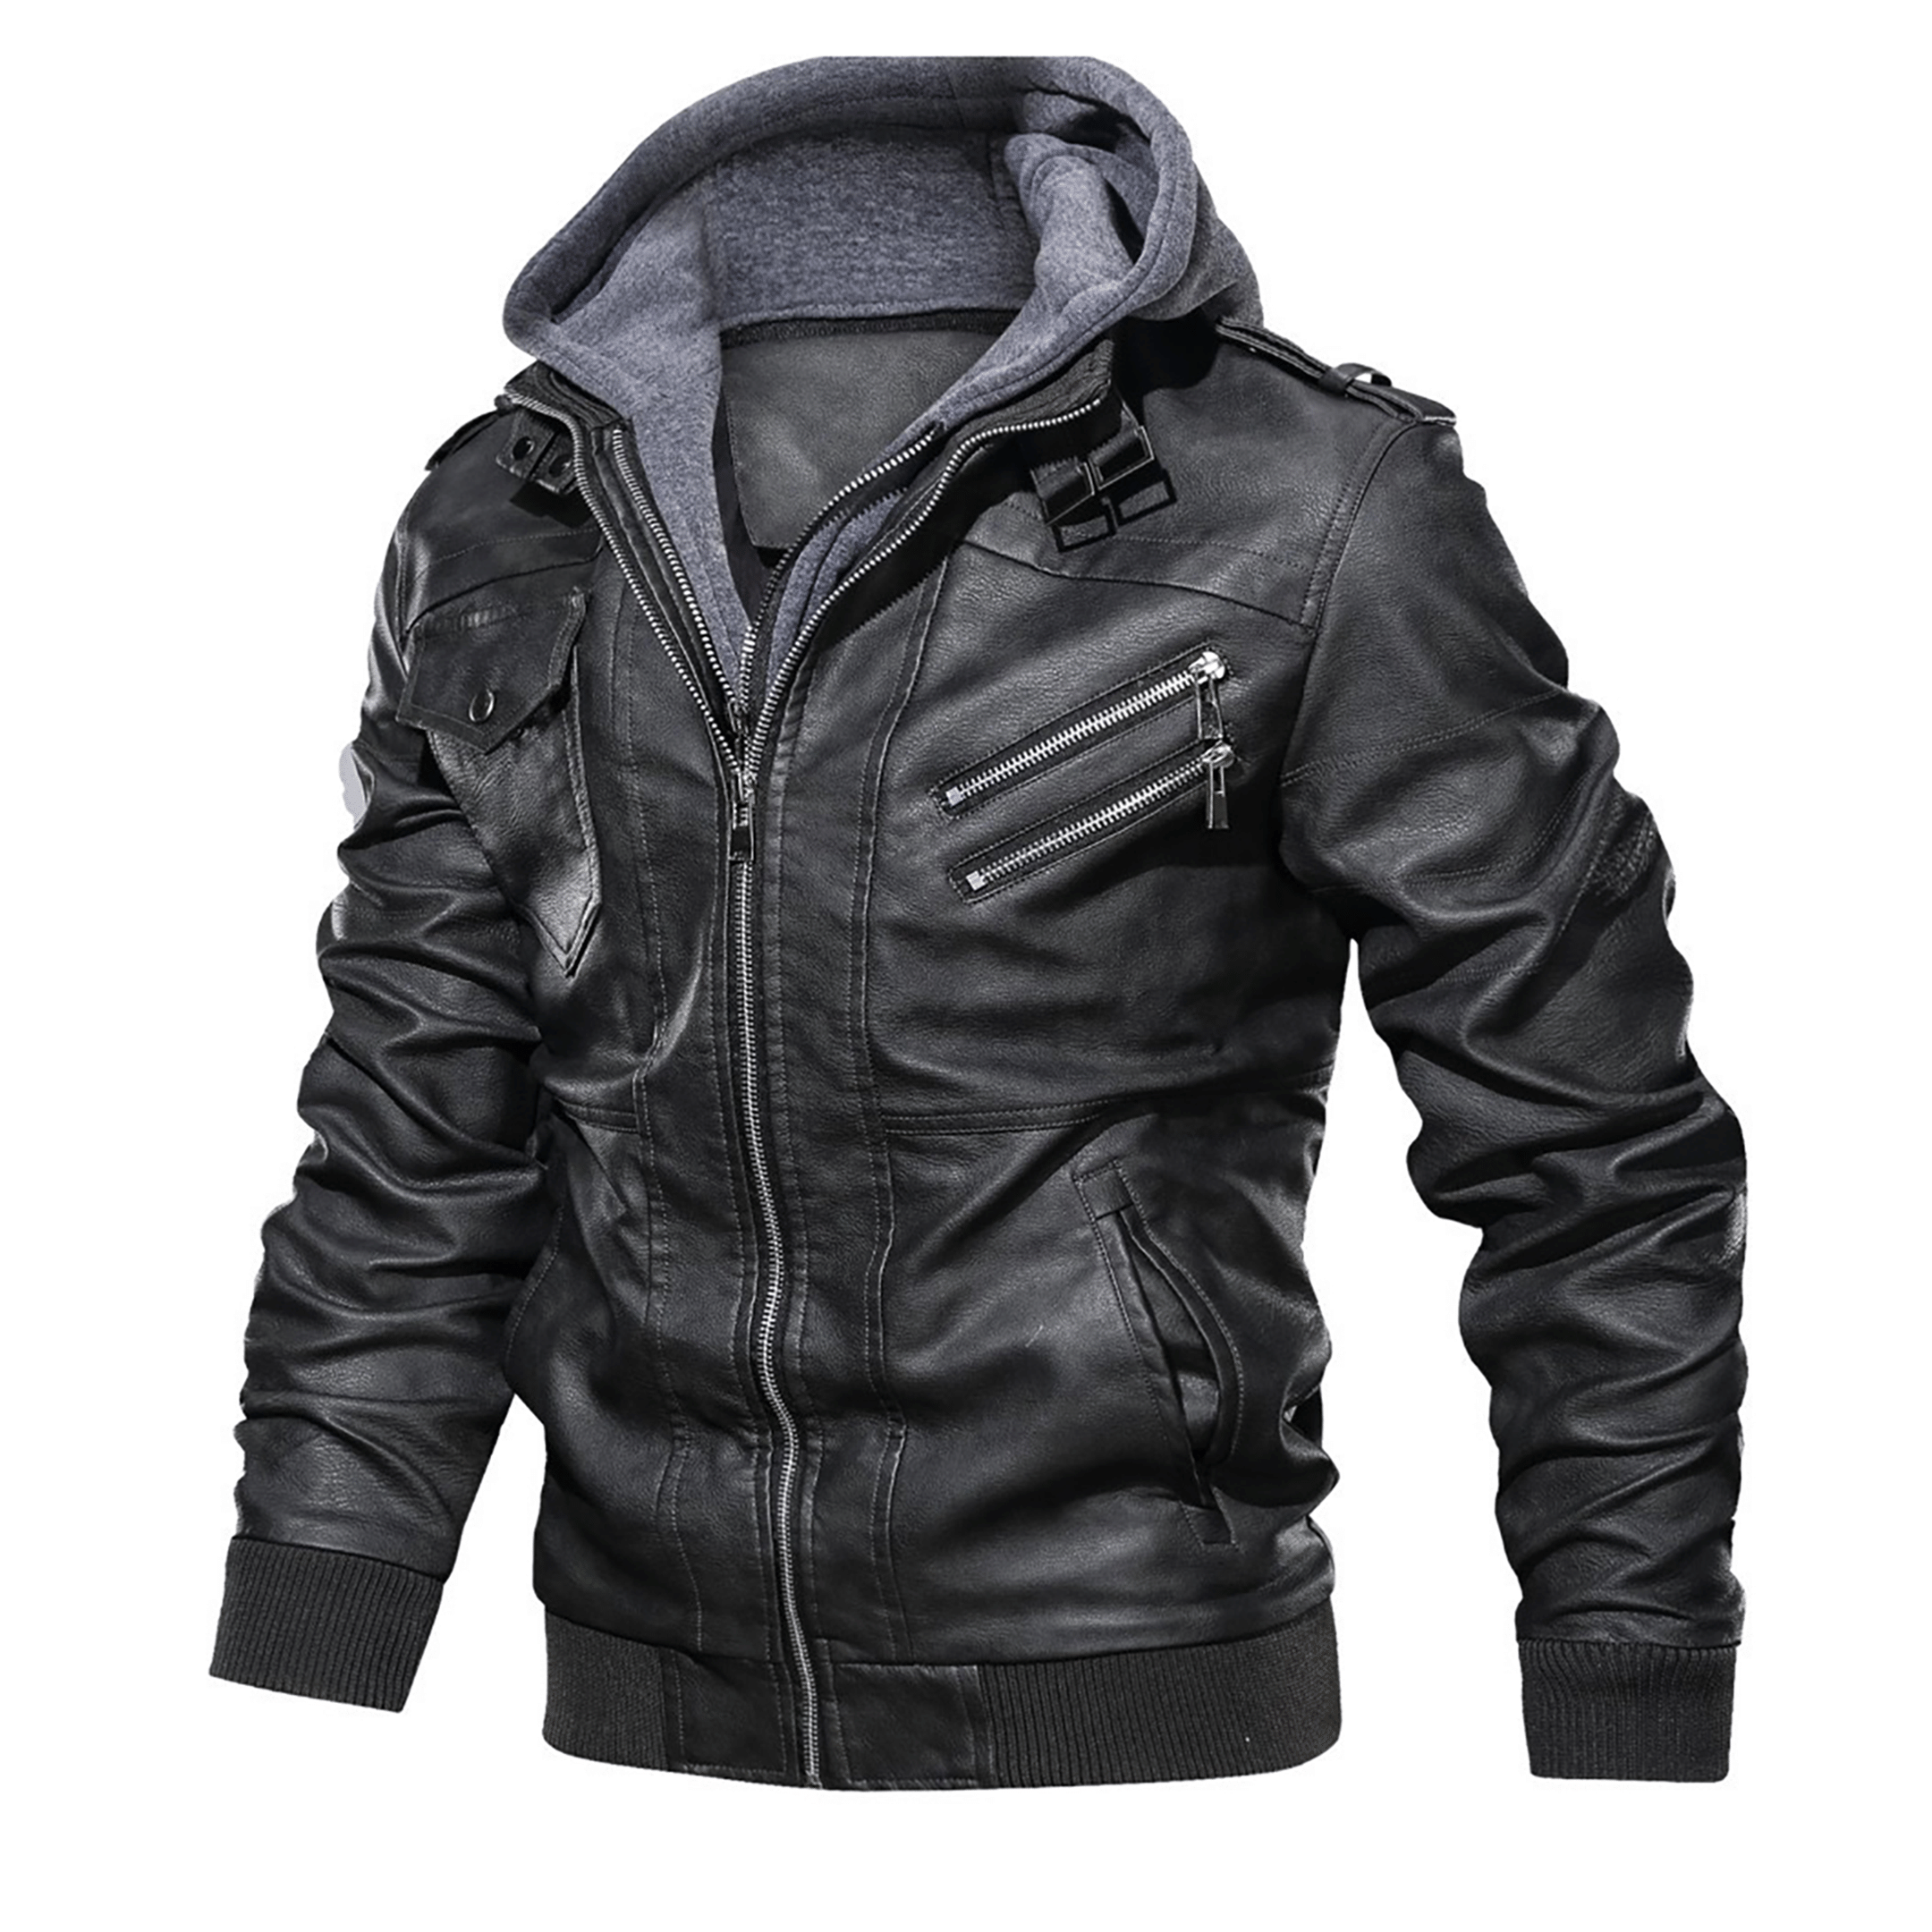 Top leather jackets and latest products 137